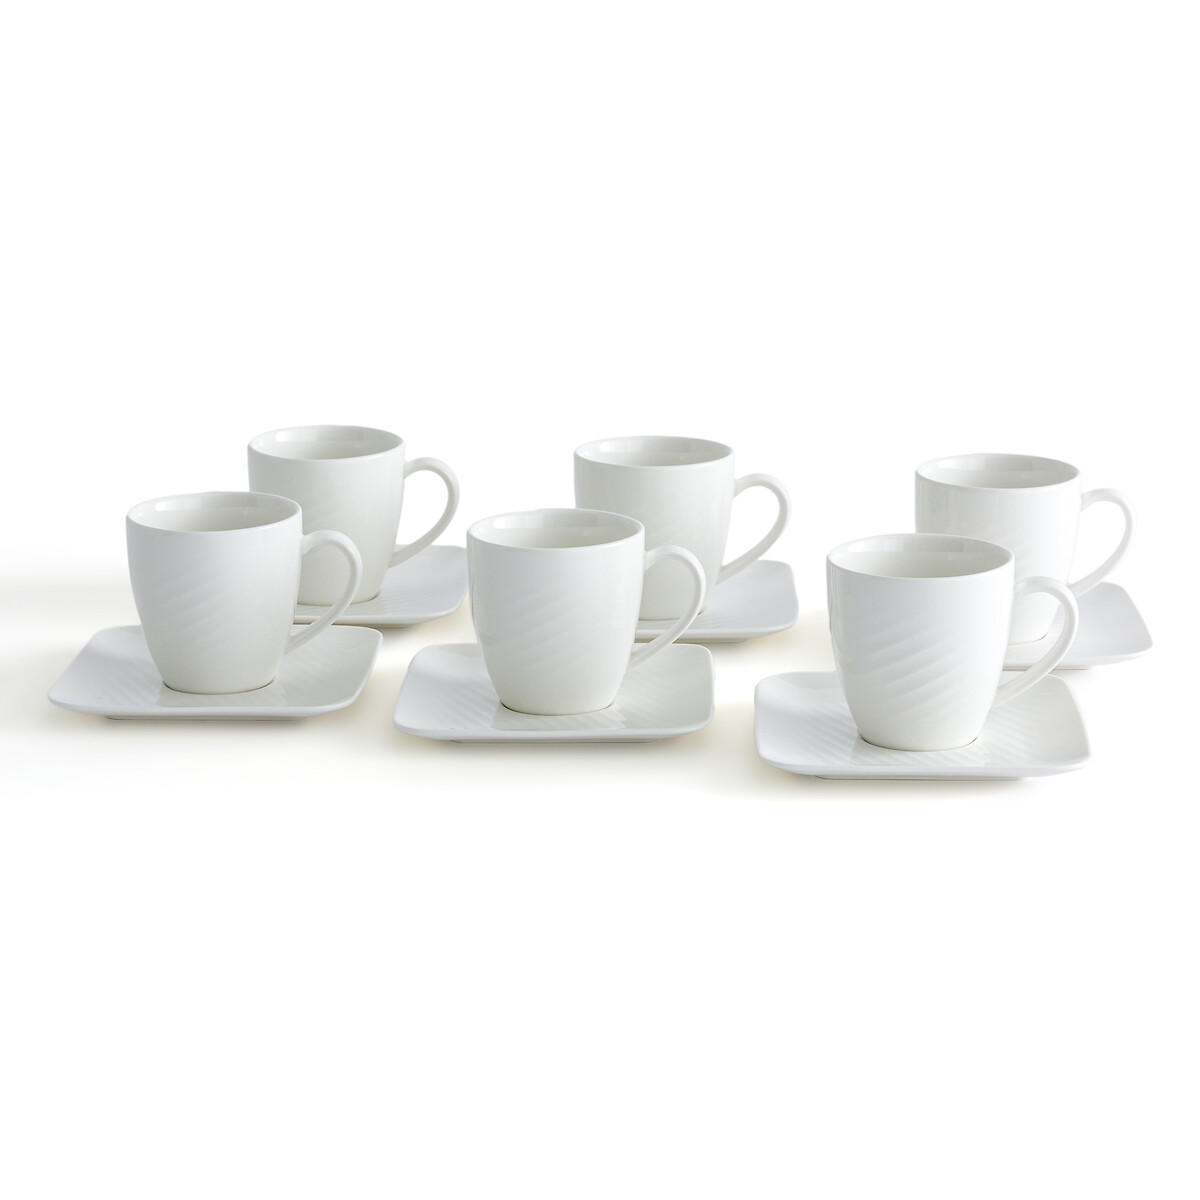 Set of 6 Veldi Porcelain Cups and Saucers